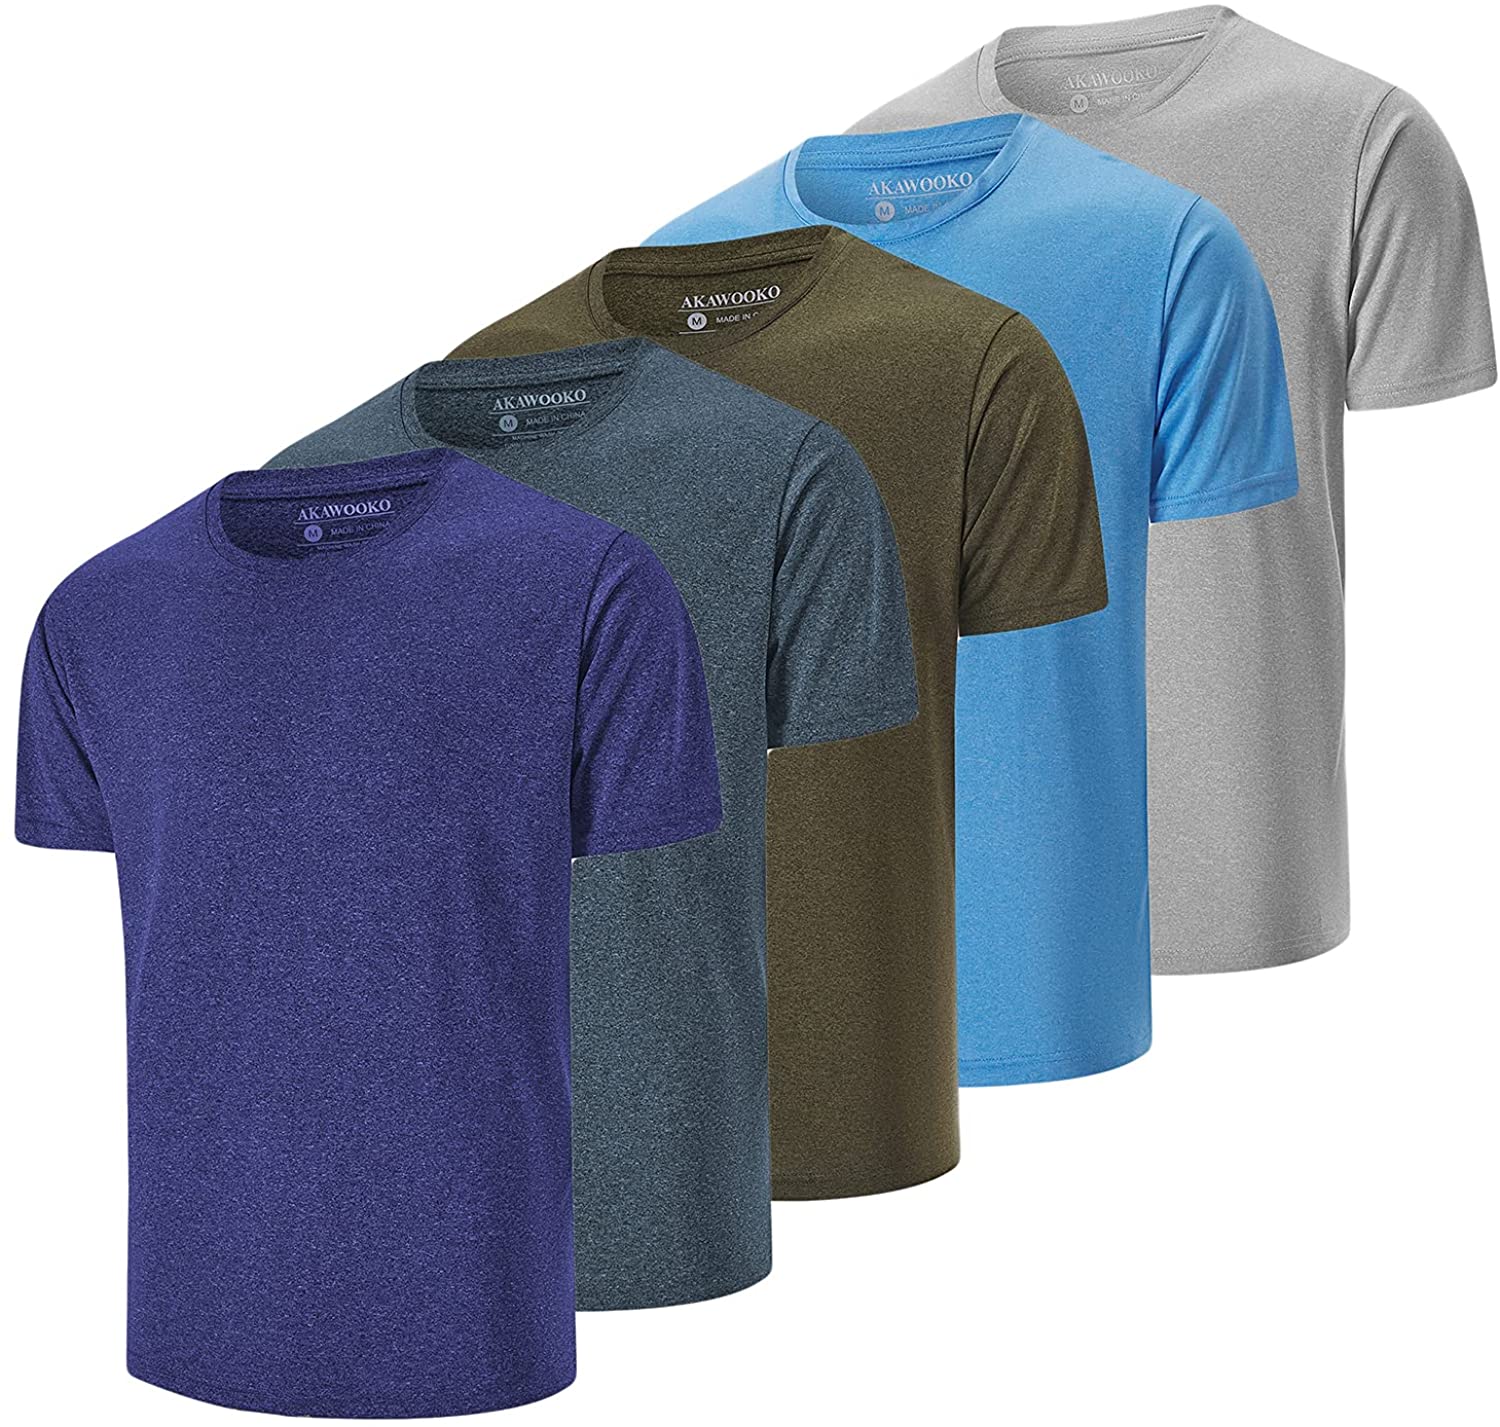 Akawooko Men's Dry Fit T Shirts